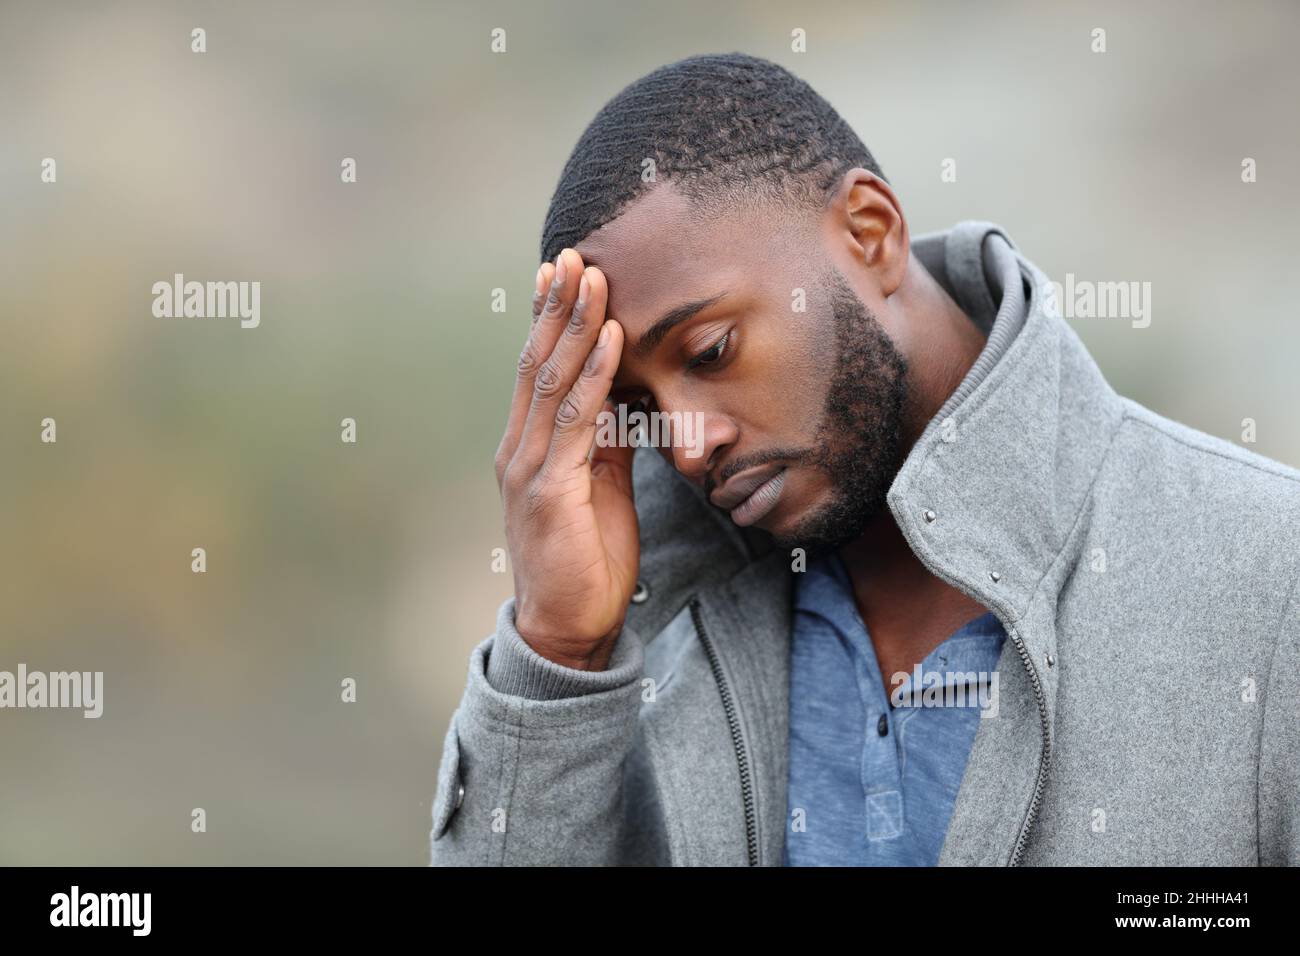 Worried man with black skin complaining in winter walking in a park Stock Photo